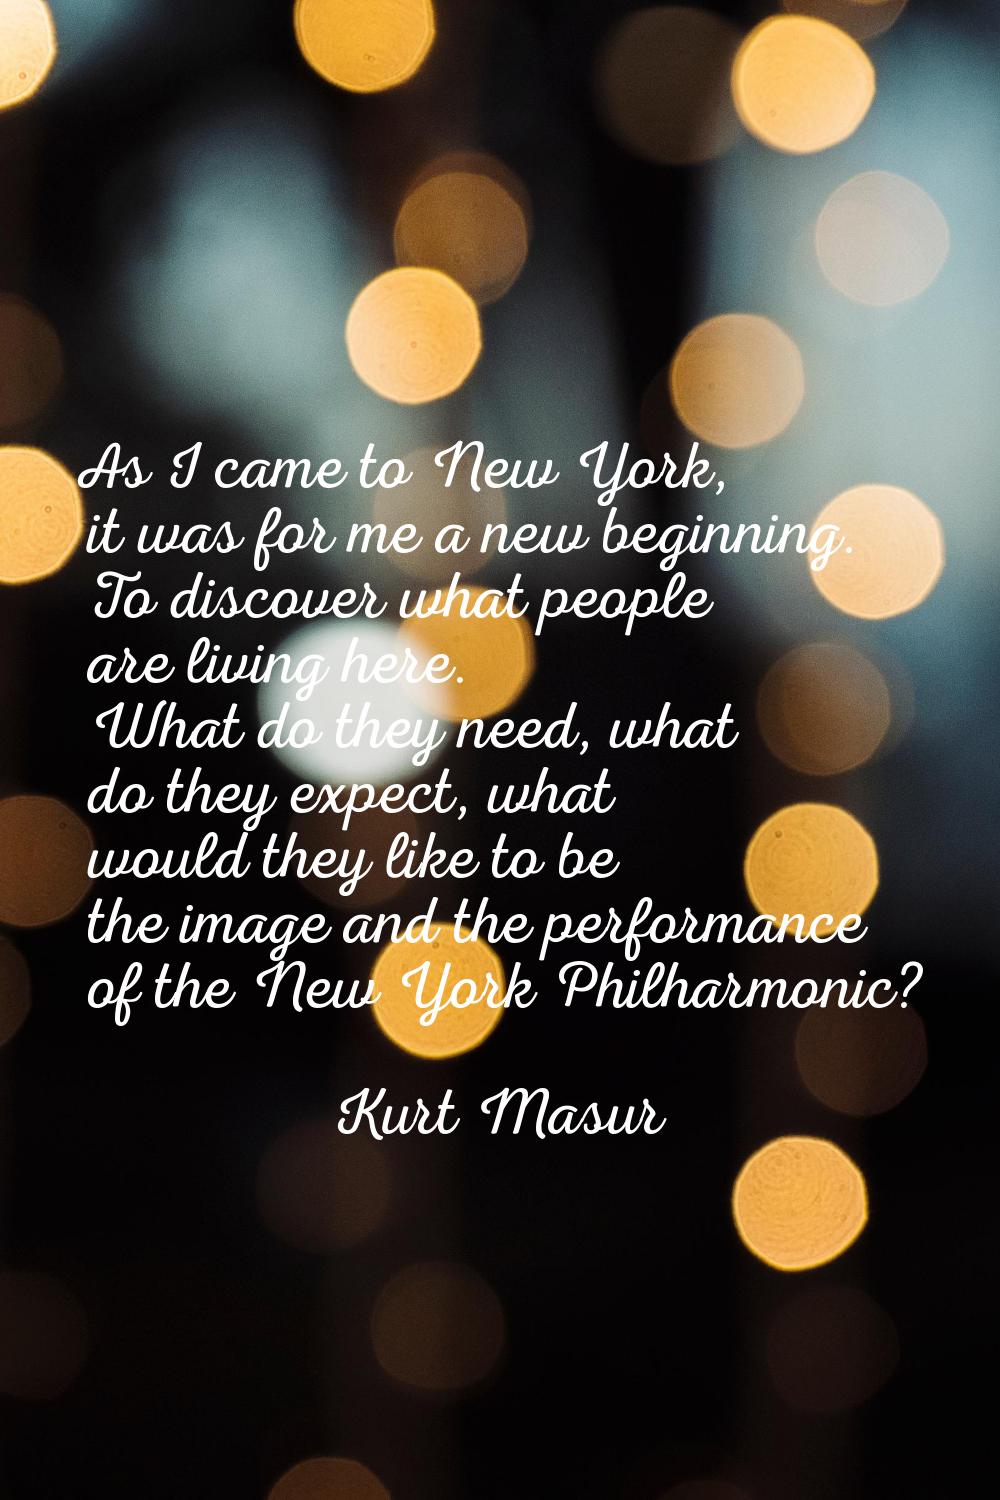 As I came to New York, it was for me a new beginning. To discover what people are living here. What